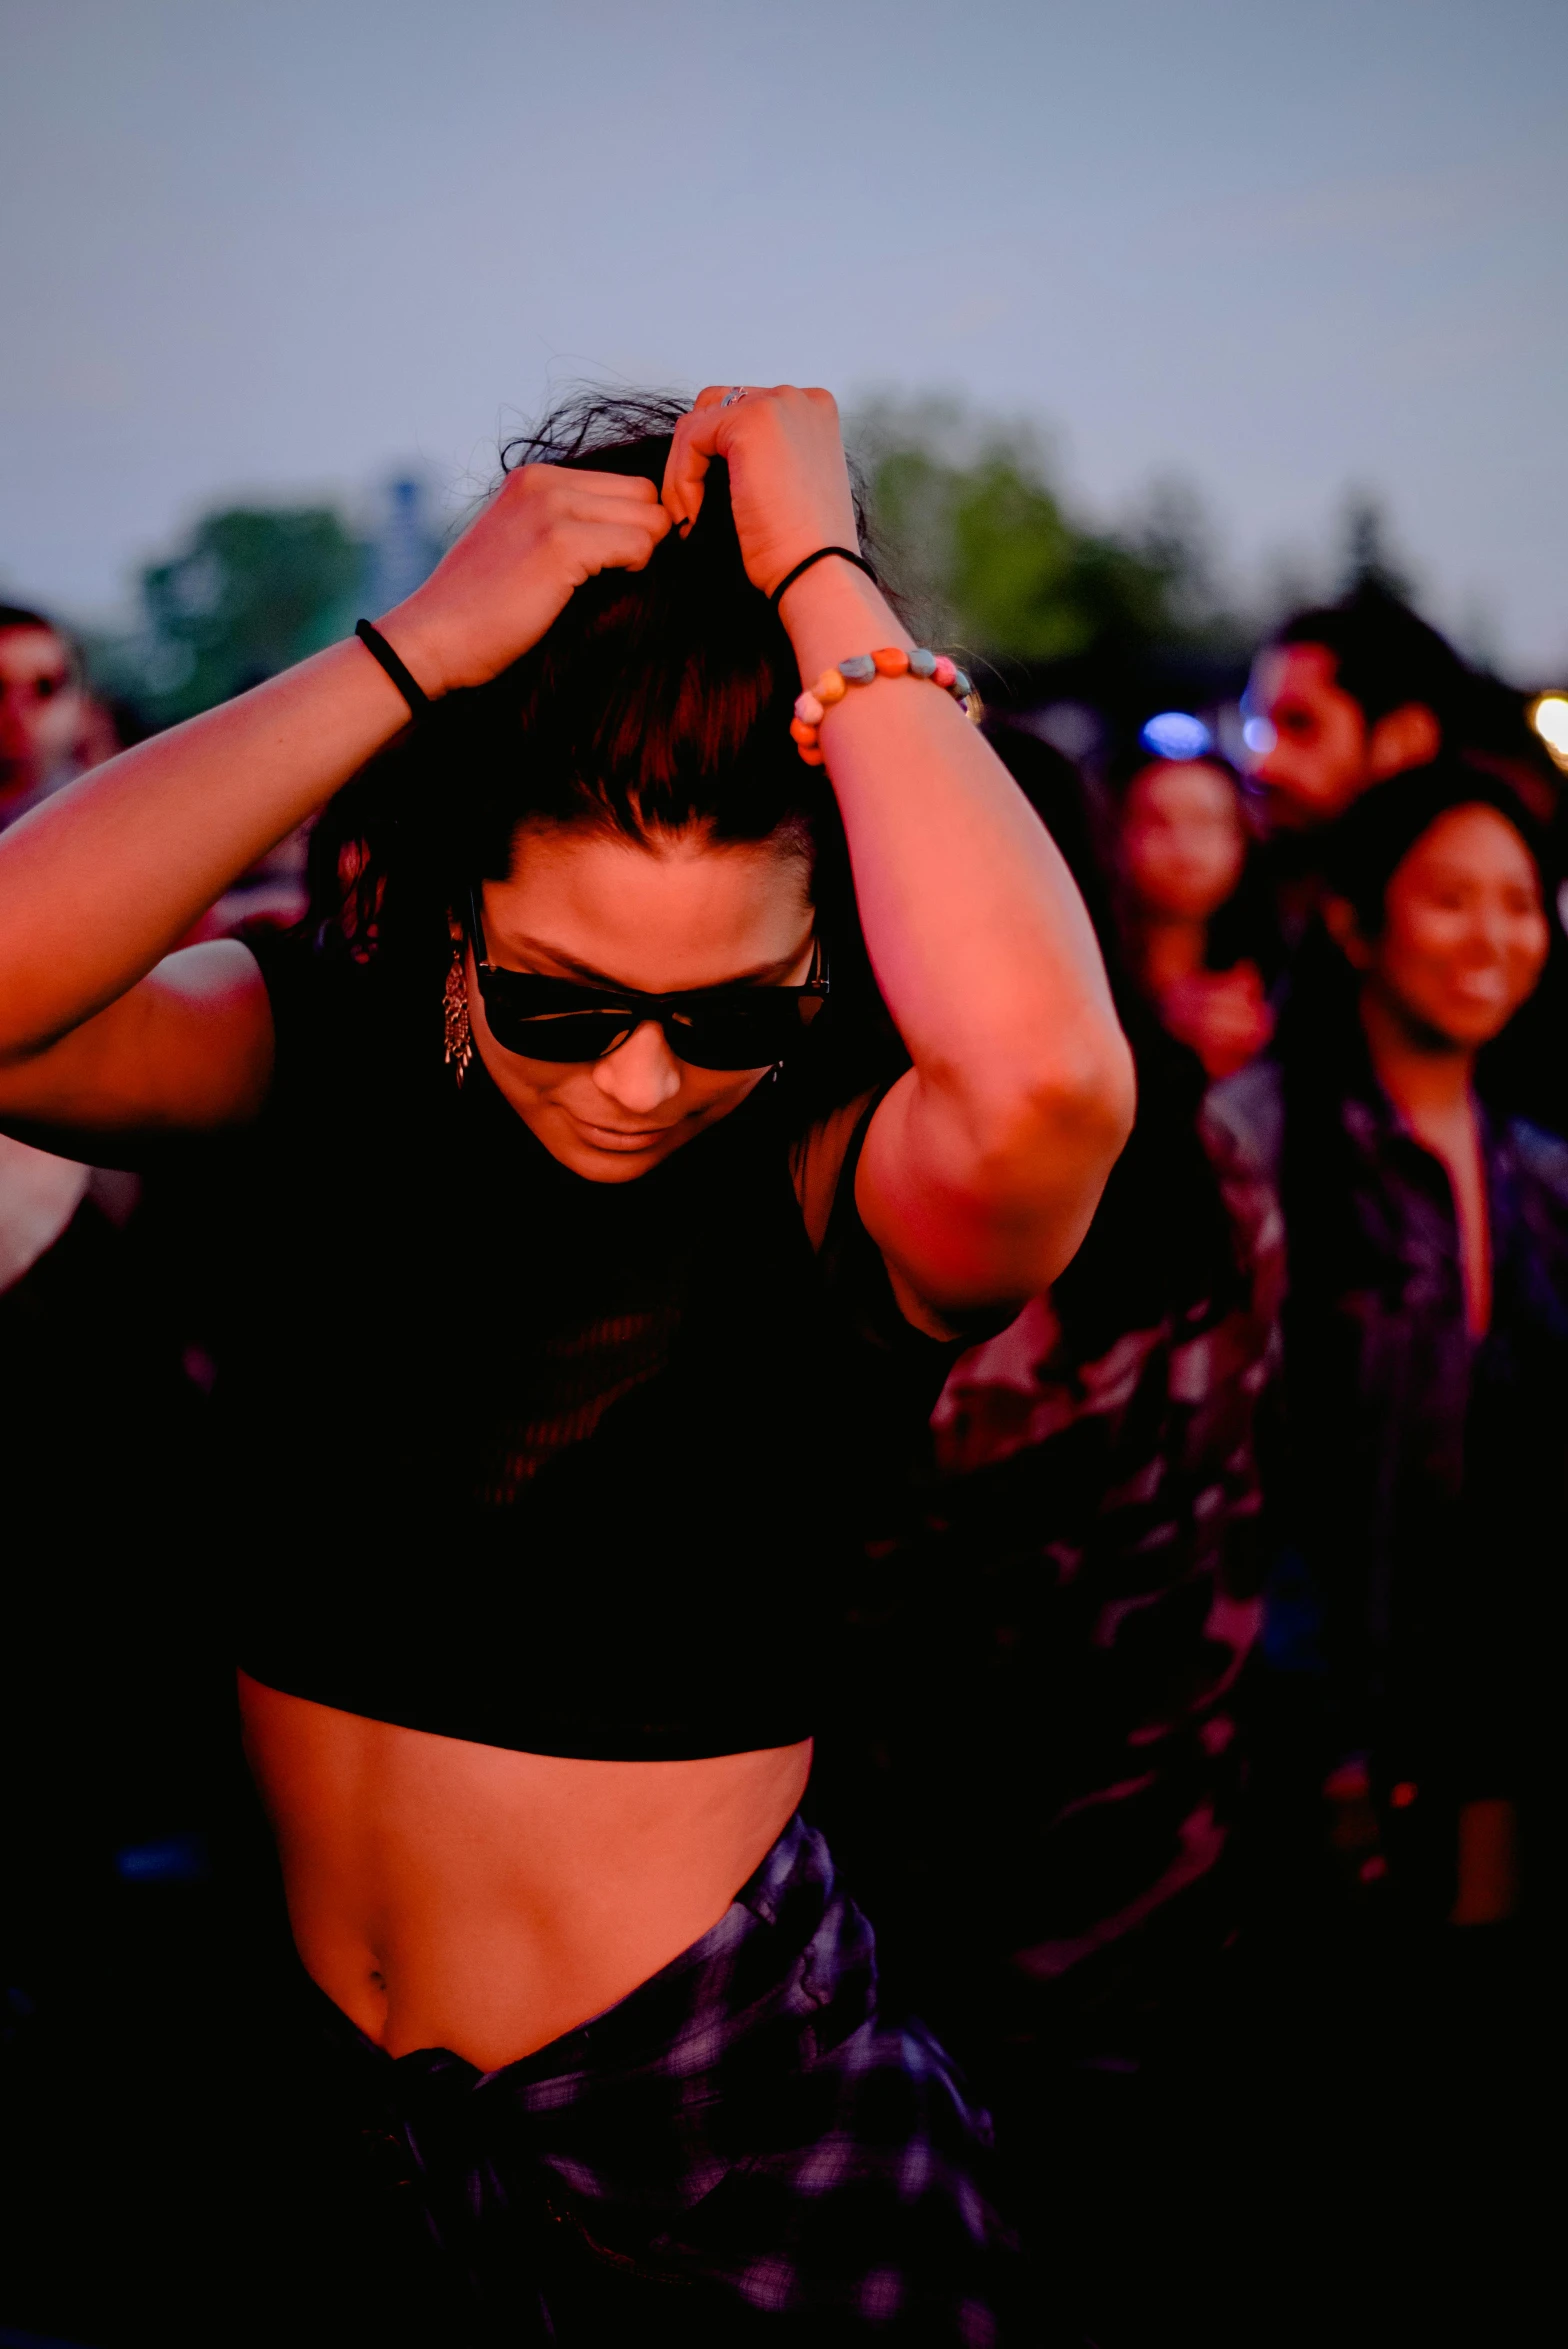 a woman standing in front of a crowd wearing sunglasses